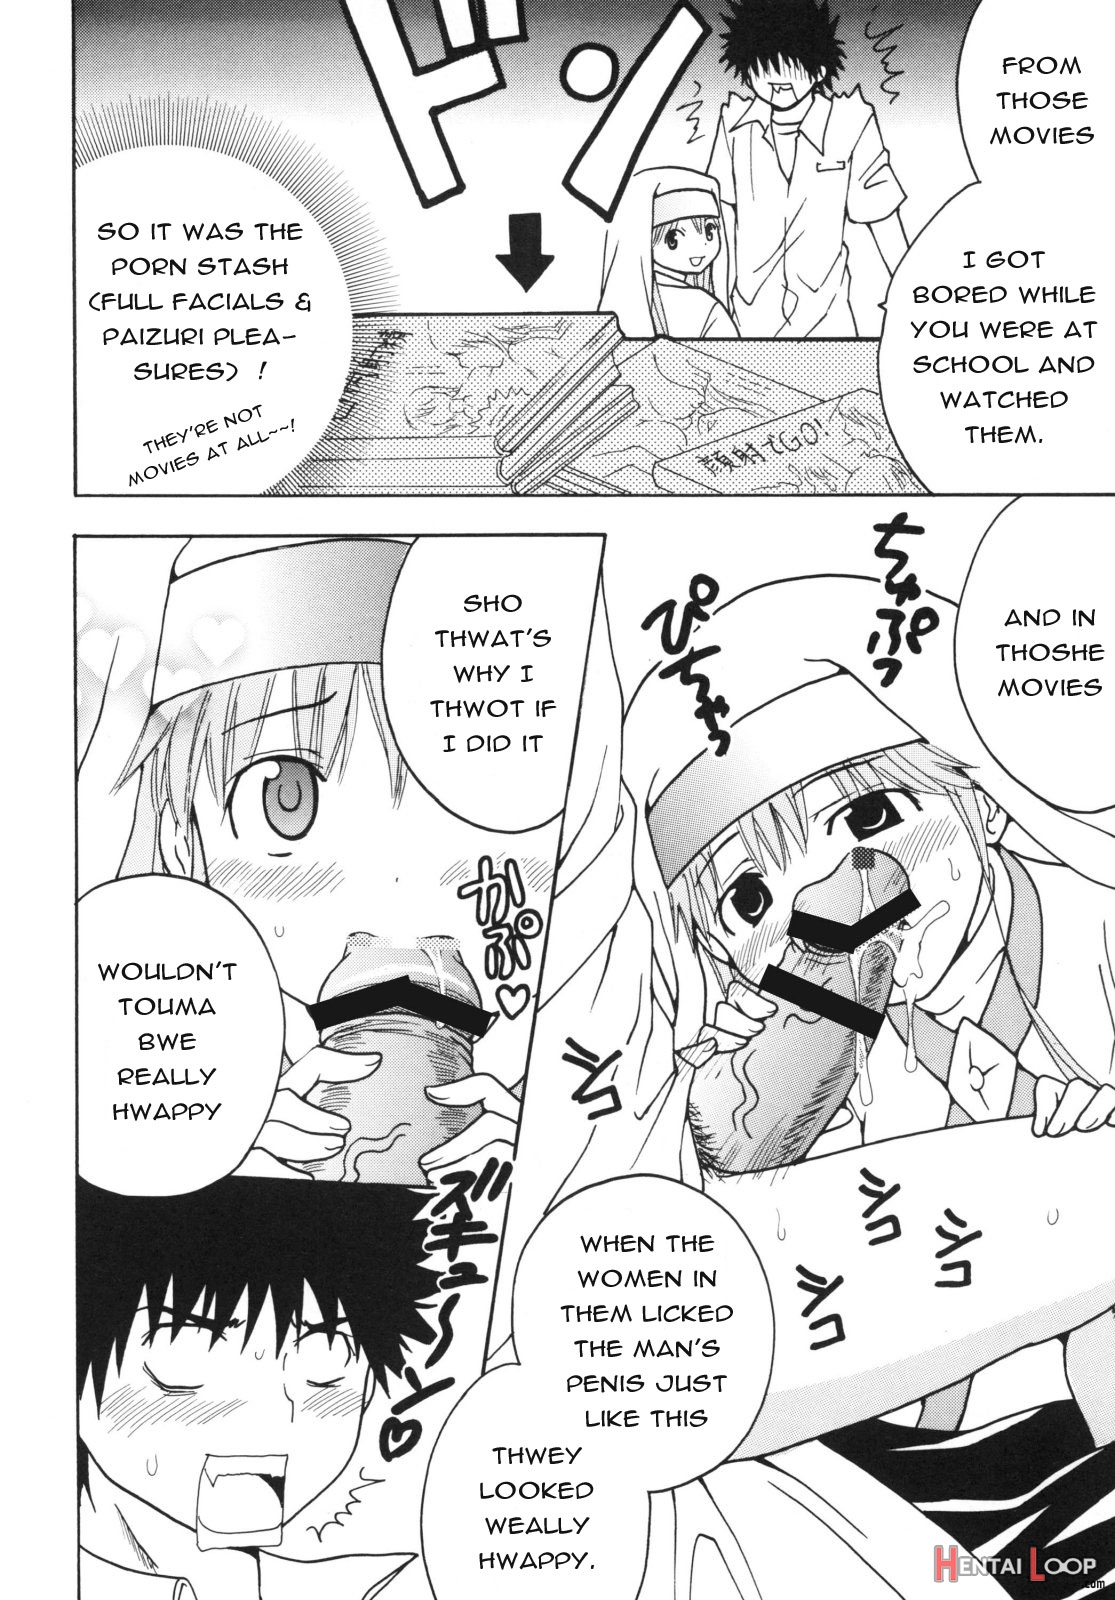 A Certain Magical Lewd Index #2 page 26